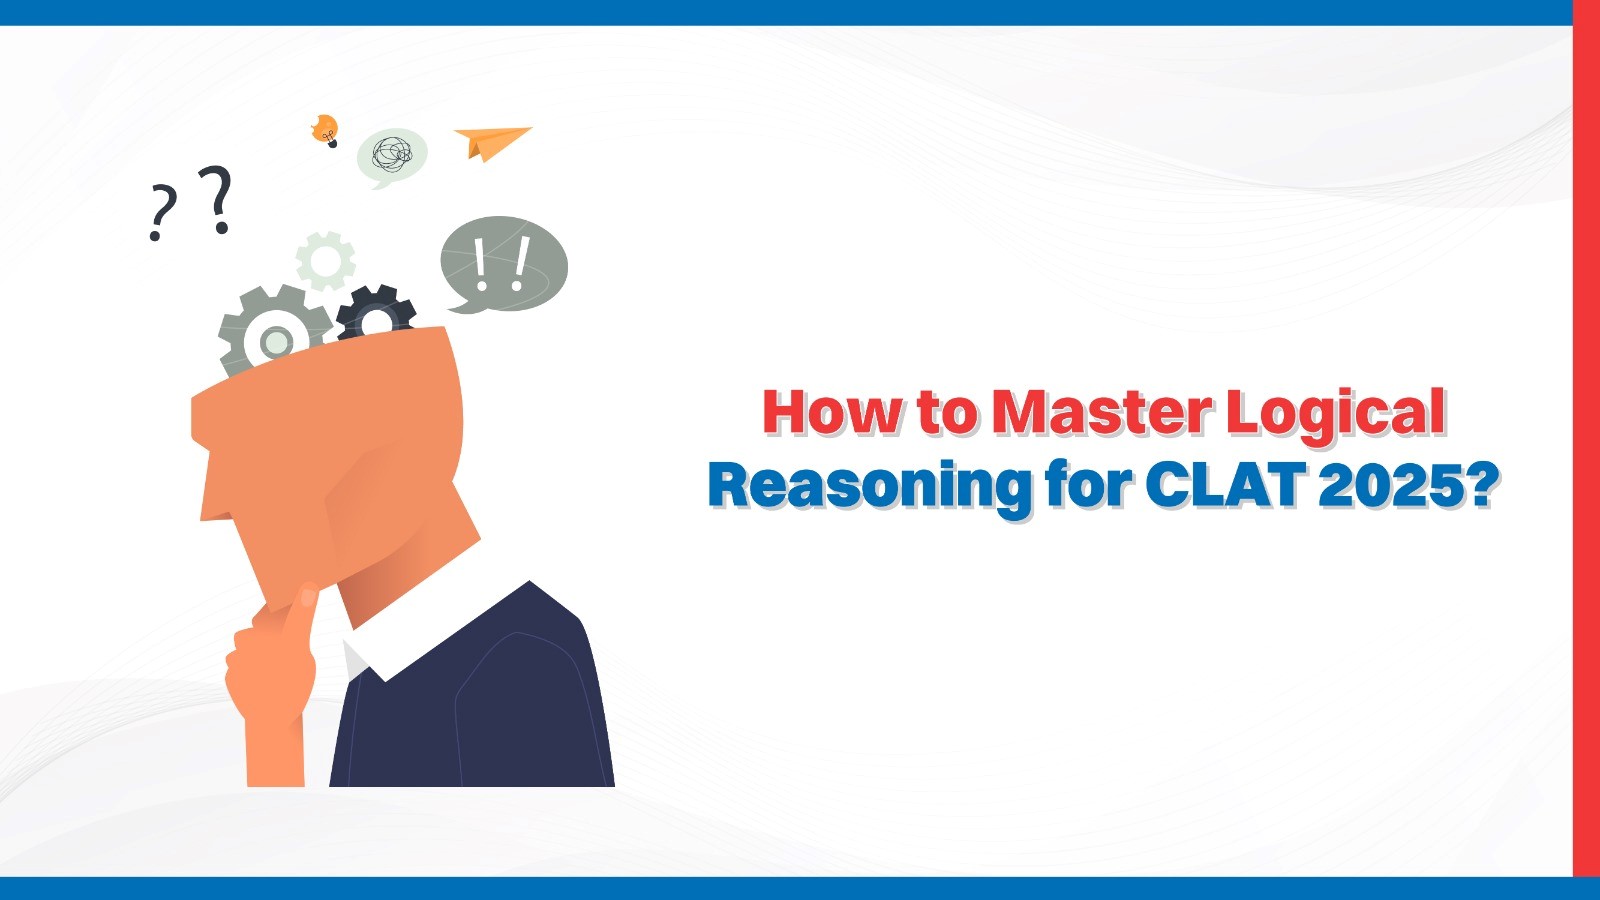 How to Master Logical Reasoning for CLAT 2025.jpg